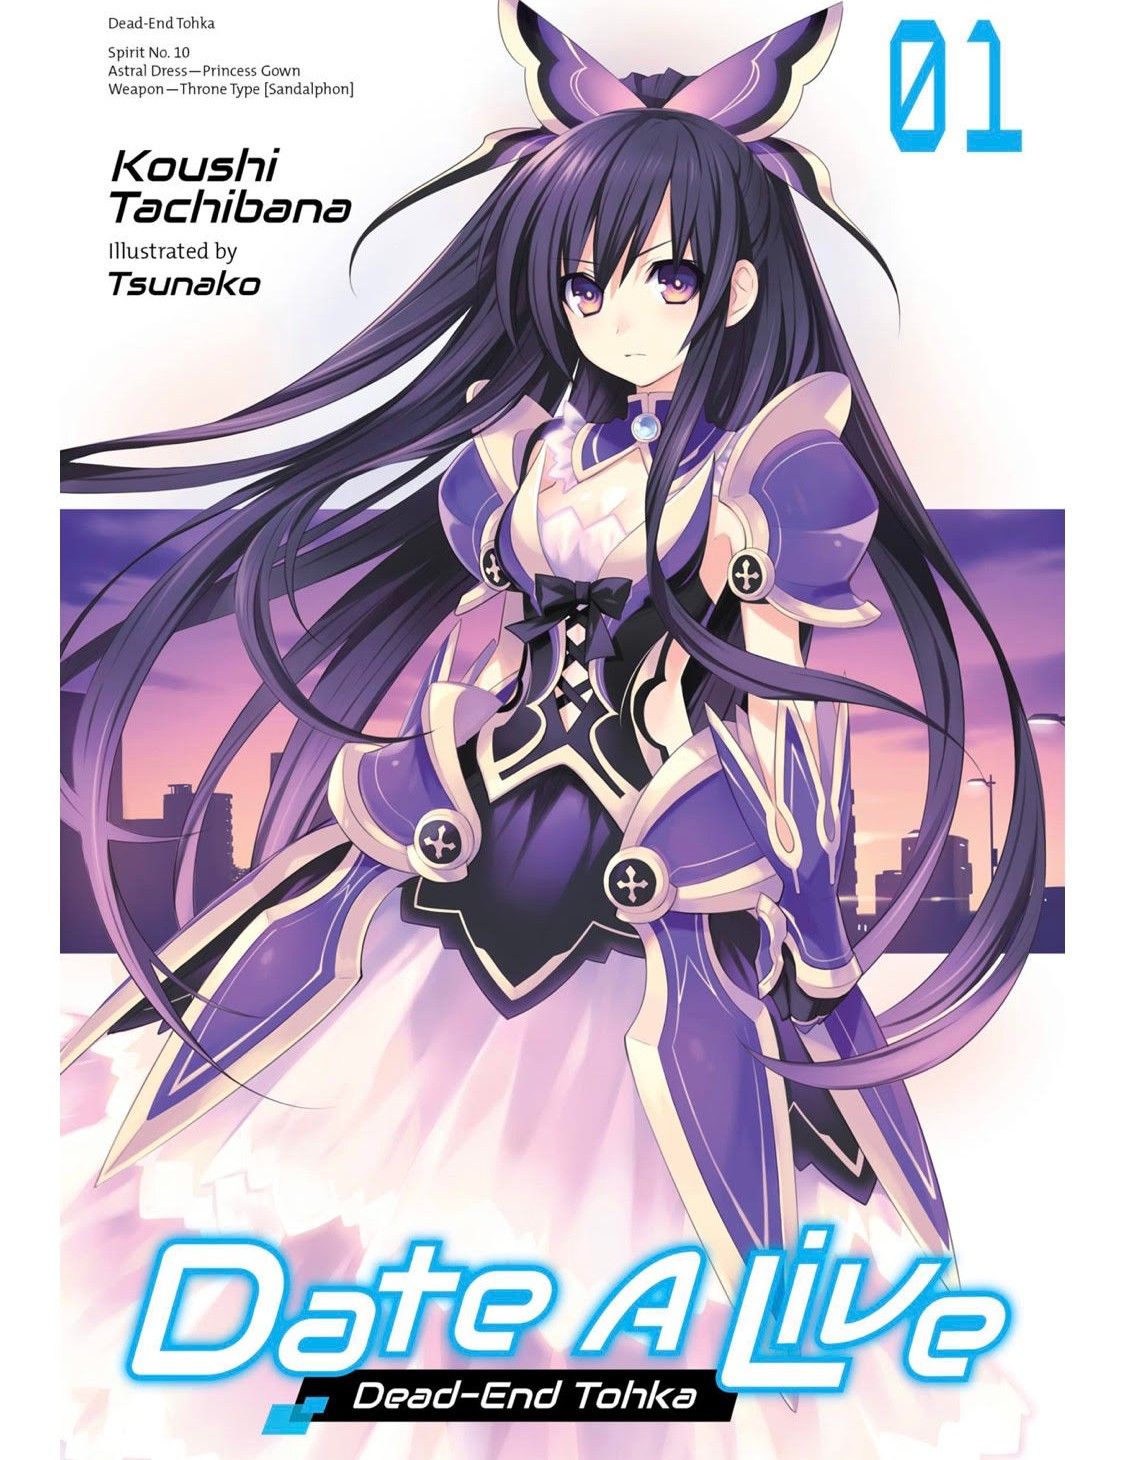 Anime Review]: Date A Live